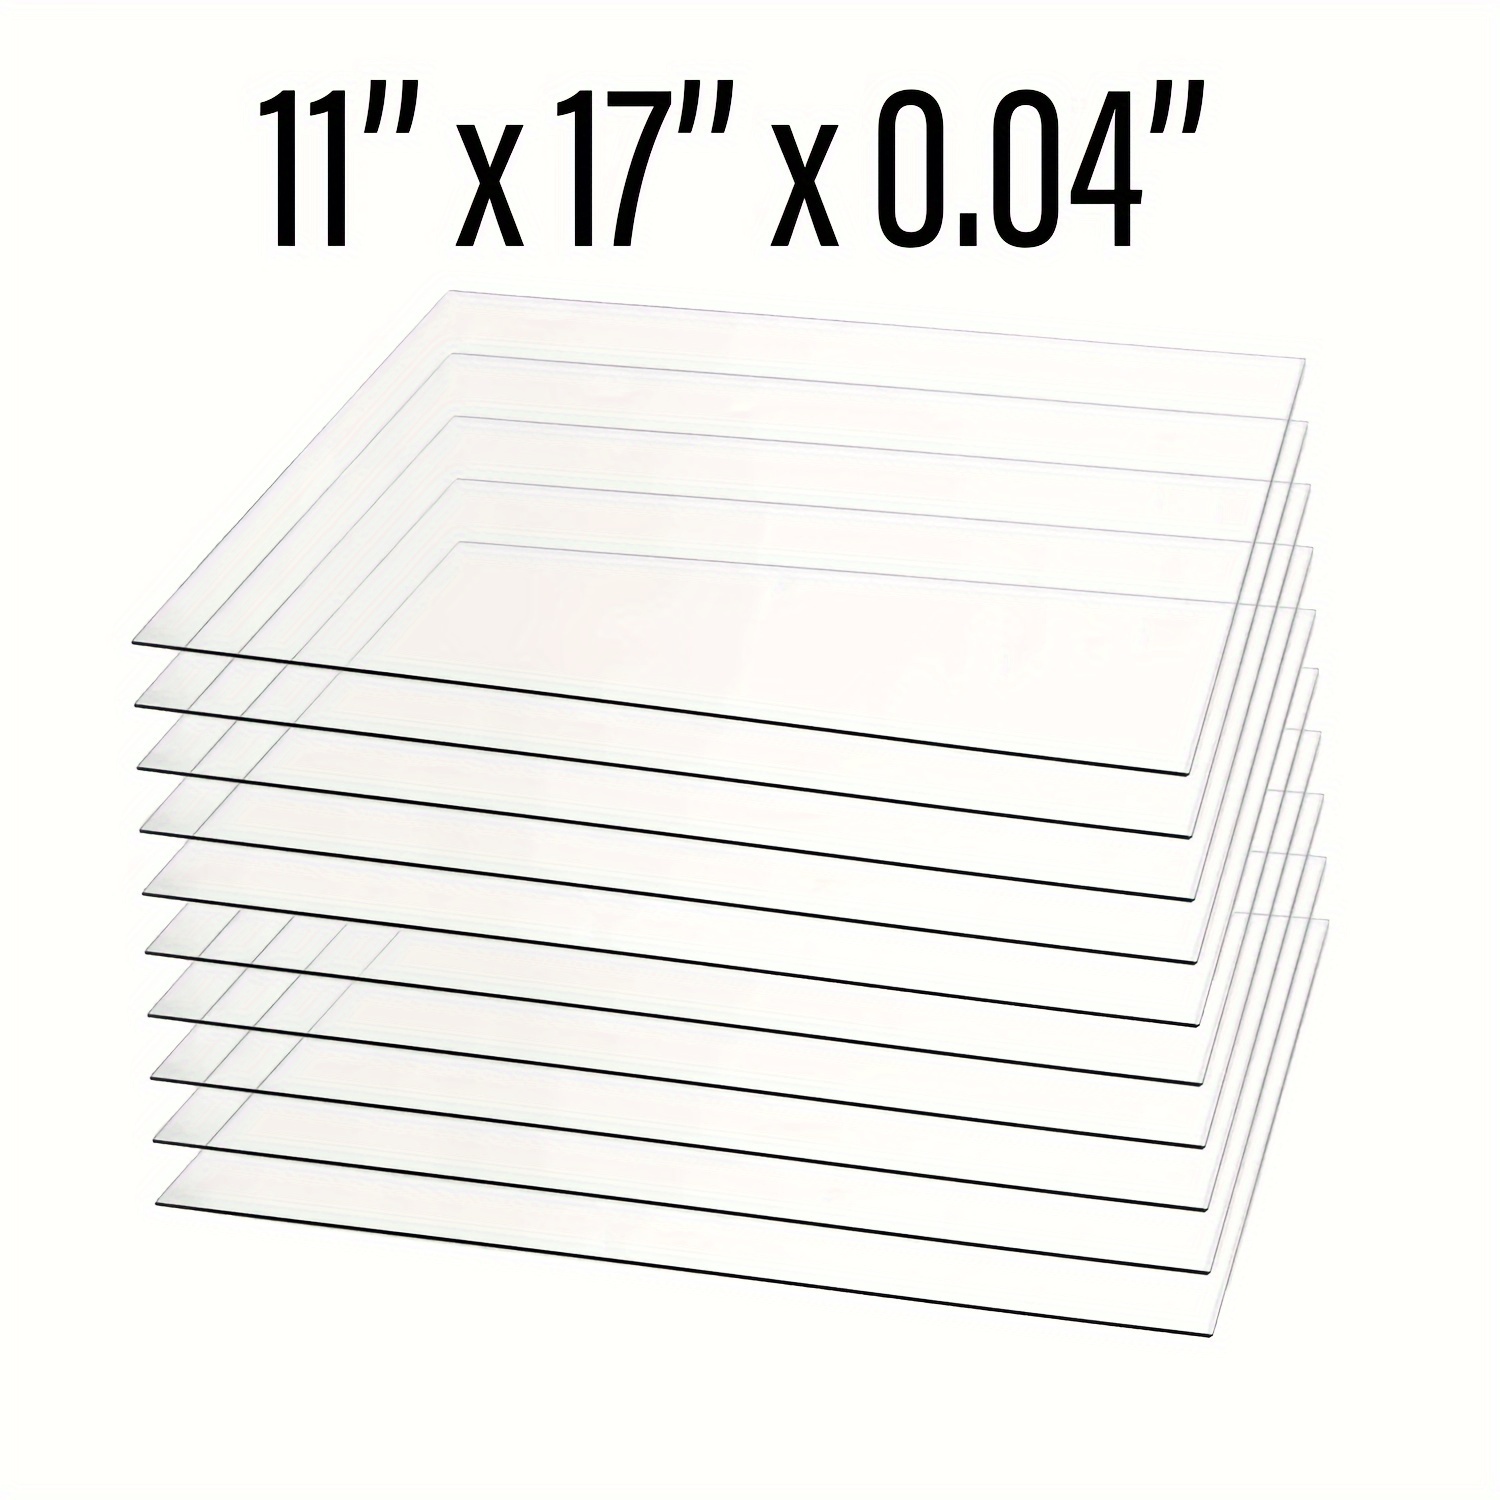 10pcs Transparent Pet Film Heat Resistant Clear Film Sheets Plastic Sheet for Box Packaging Materials DIY Crafts, Size: Small